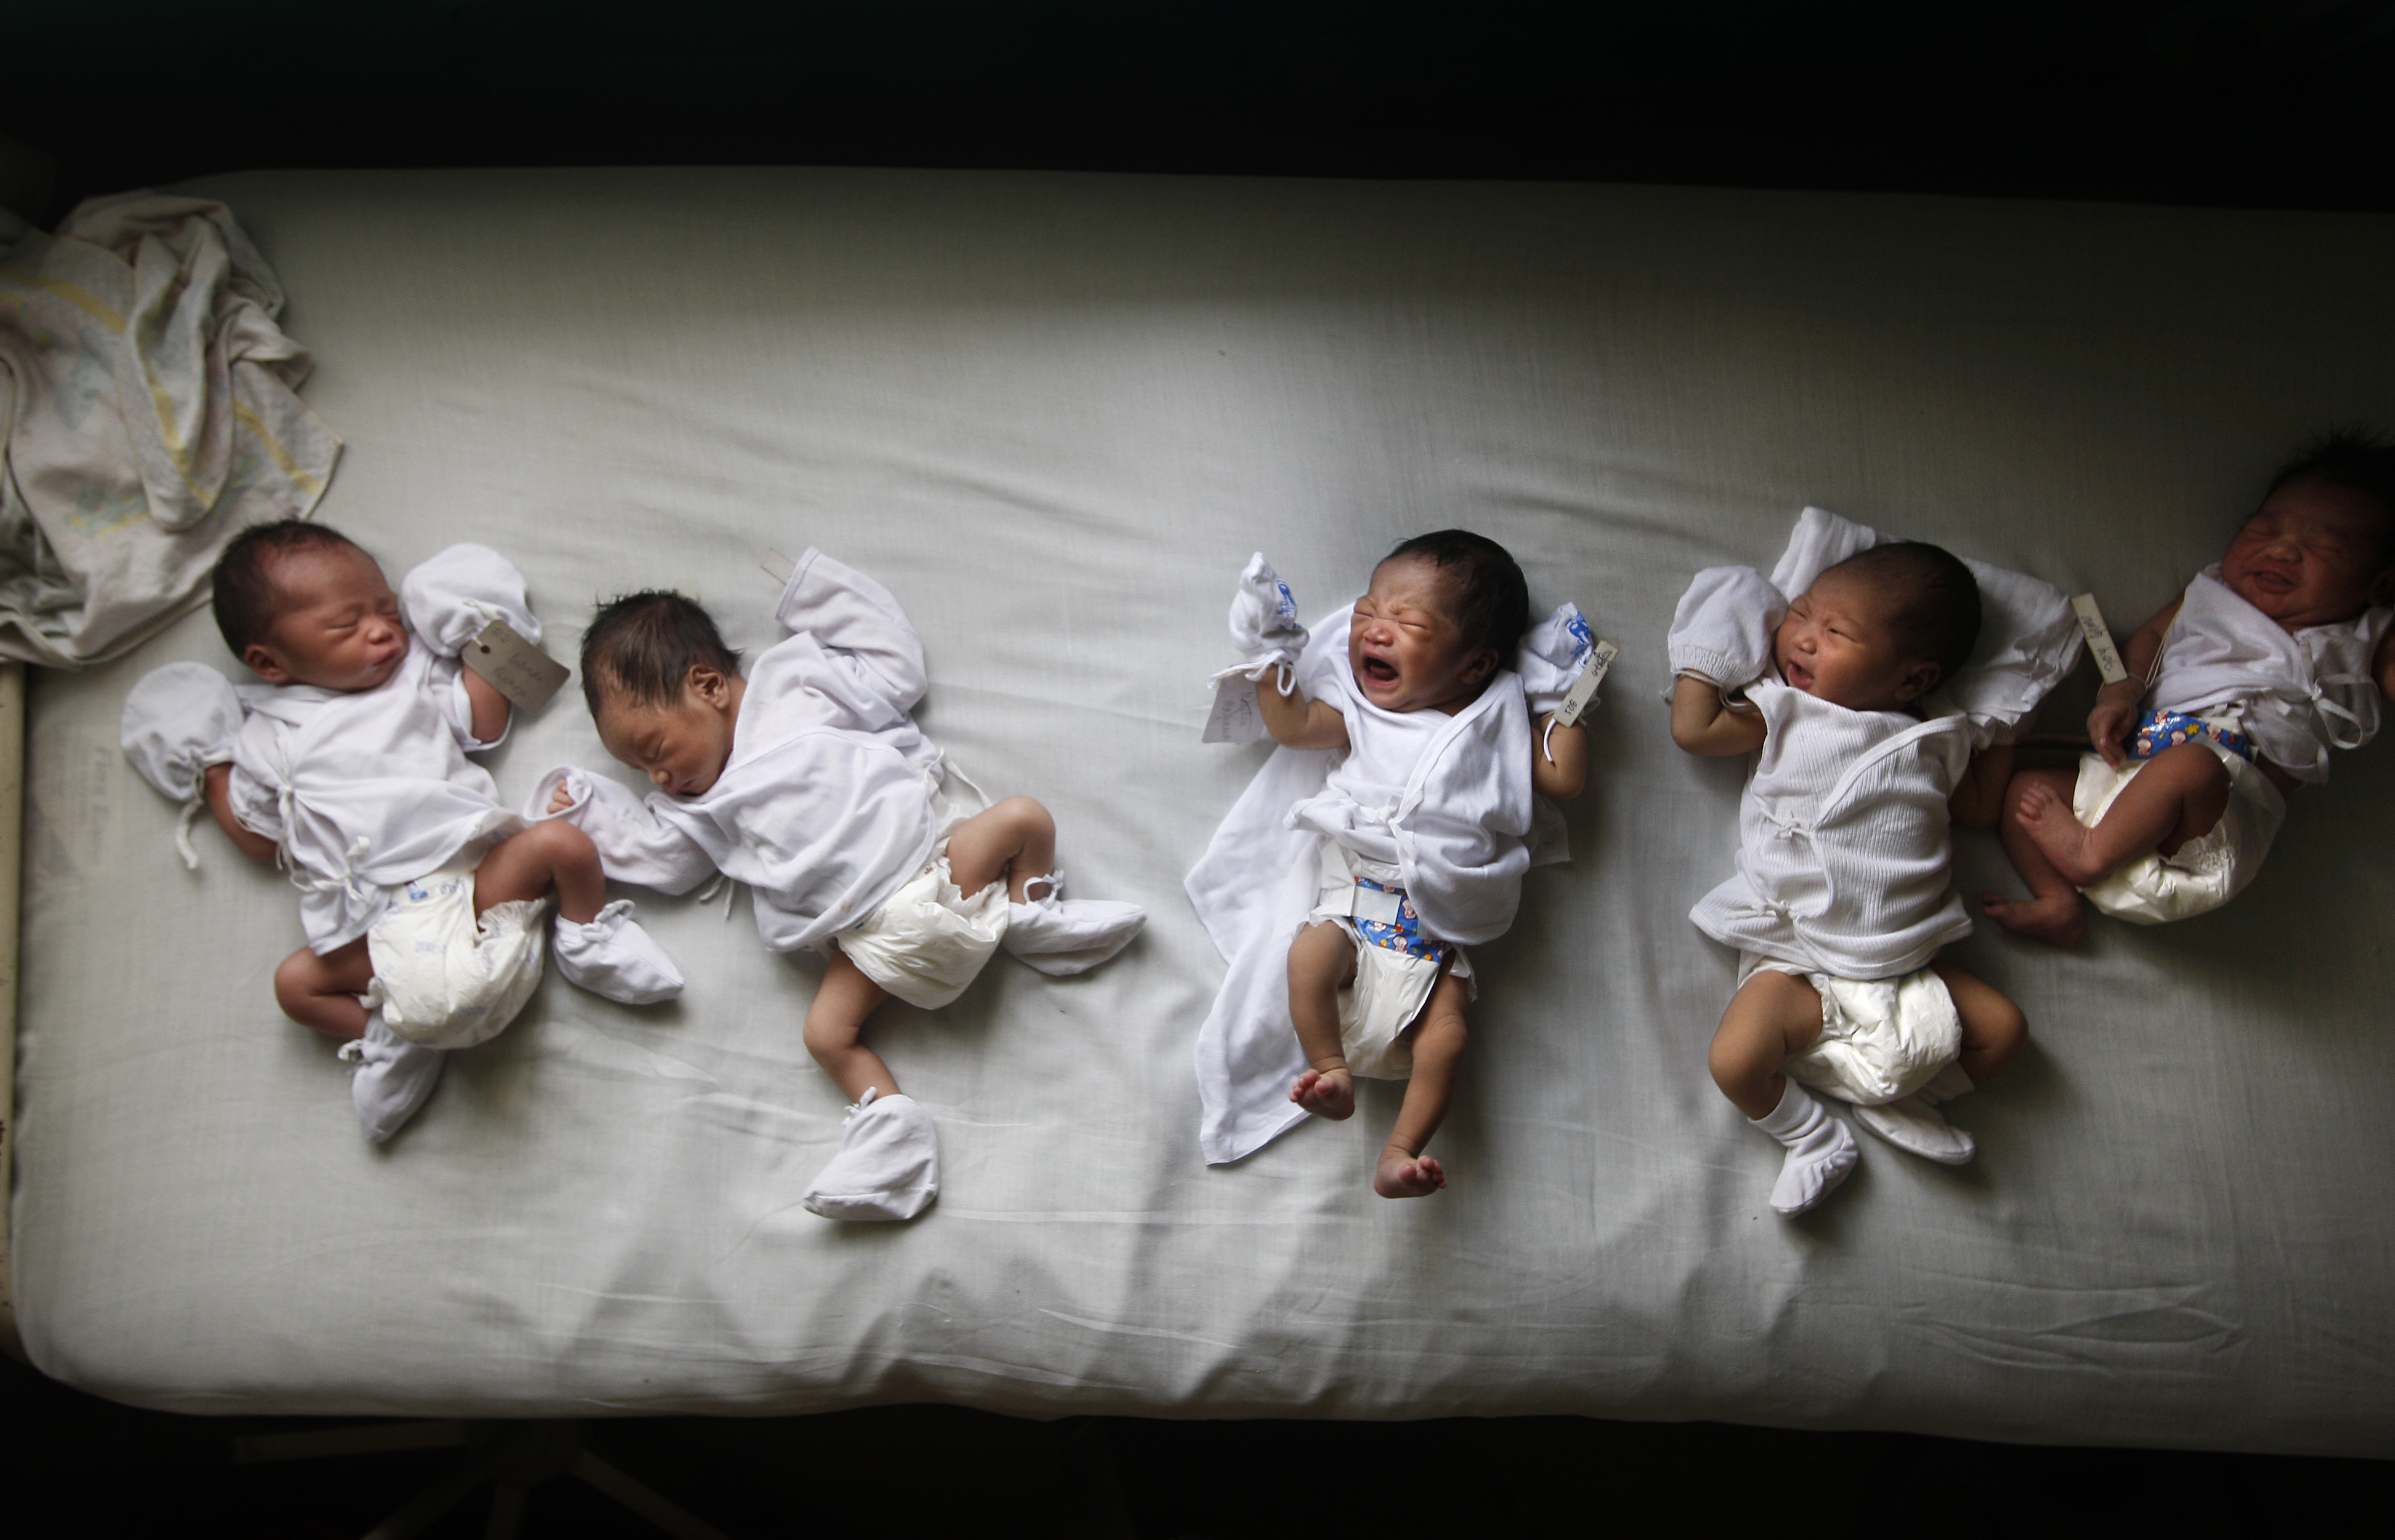 Newborns are lined up side by side in Dr. Jose Fabella Memorial Hospital, a fraction of the 50 to 100 babies born there everyday. The hospital is sometimes dubbed the "baby factory" because of the sheer volume of children being born there